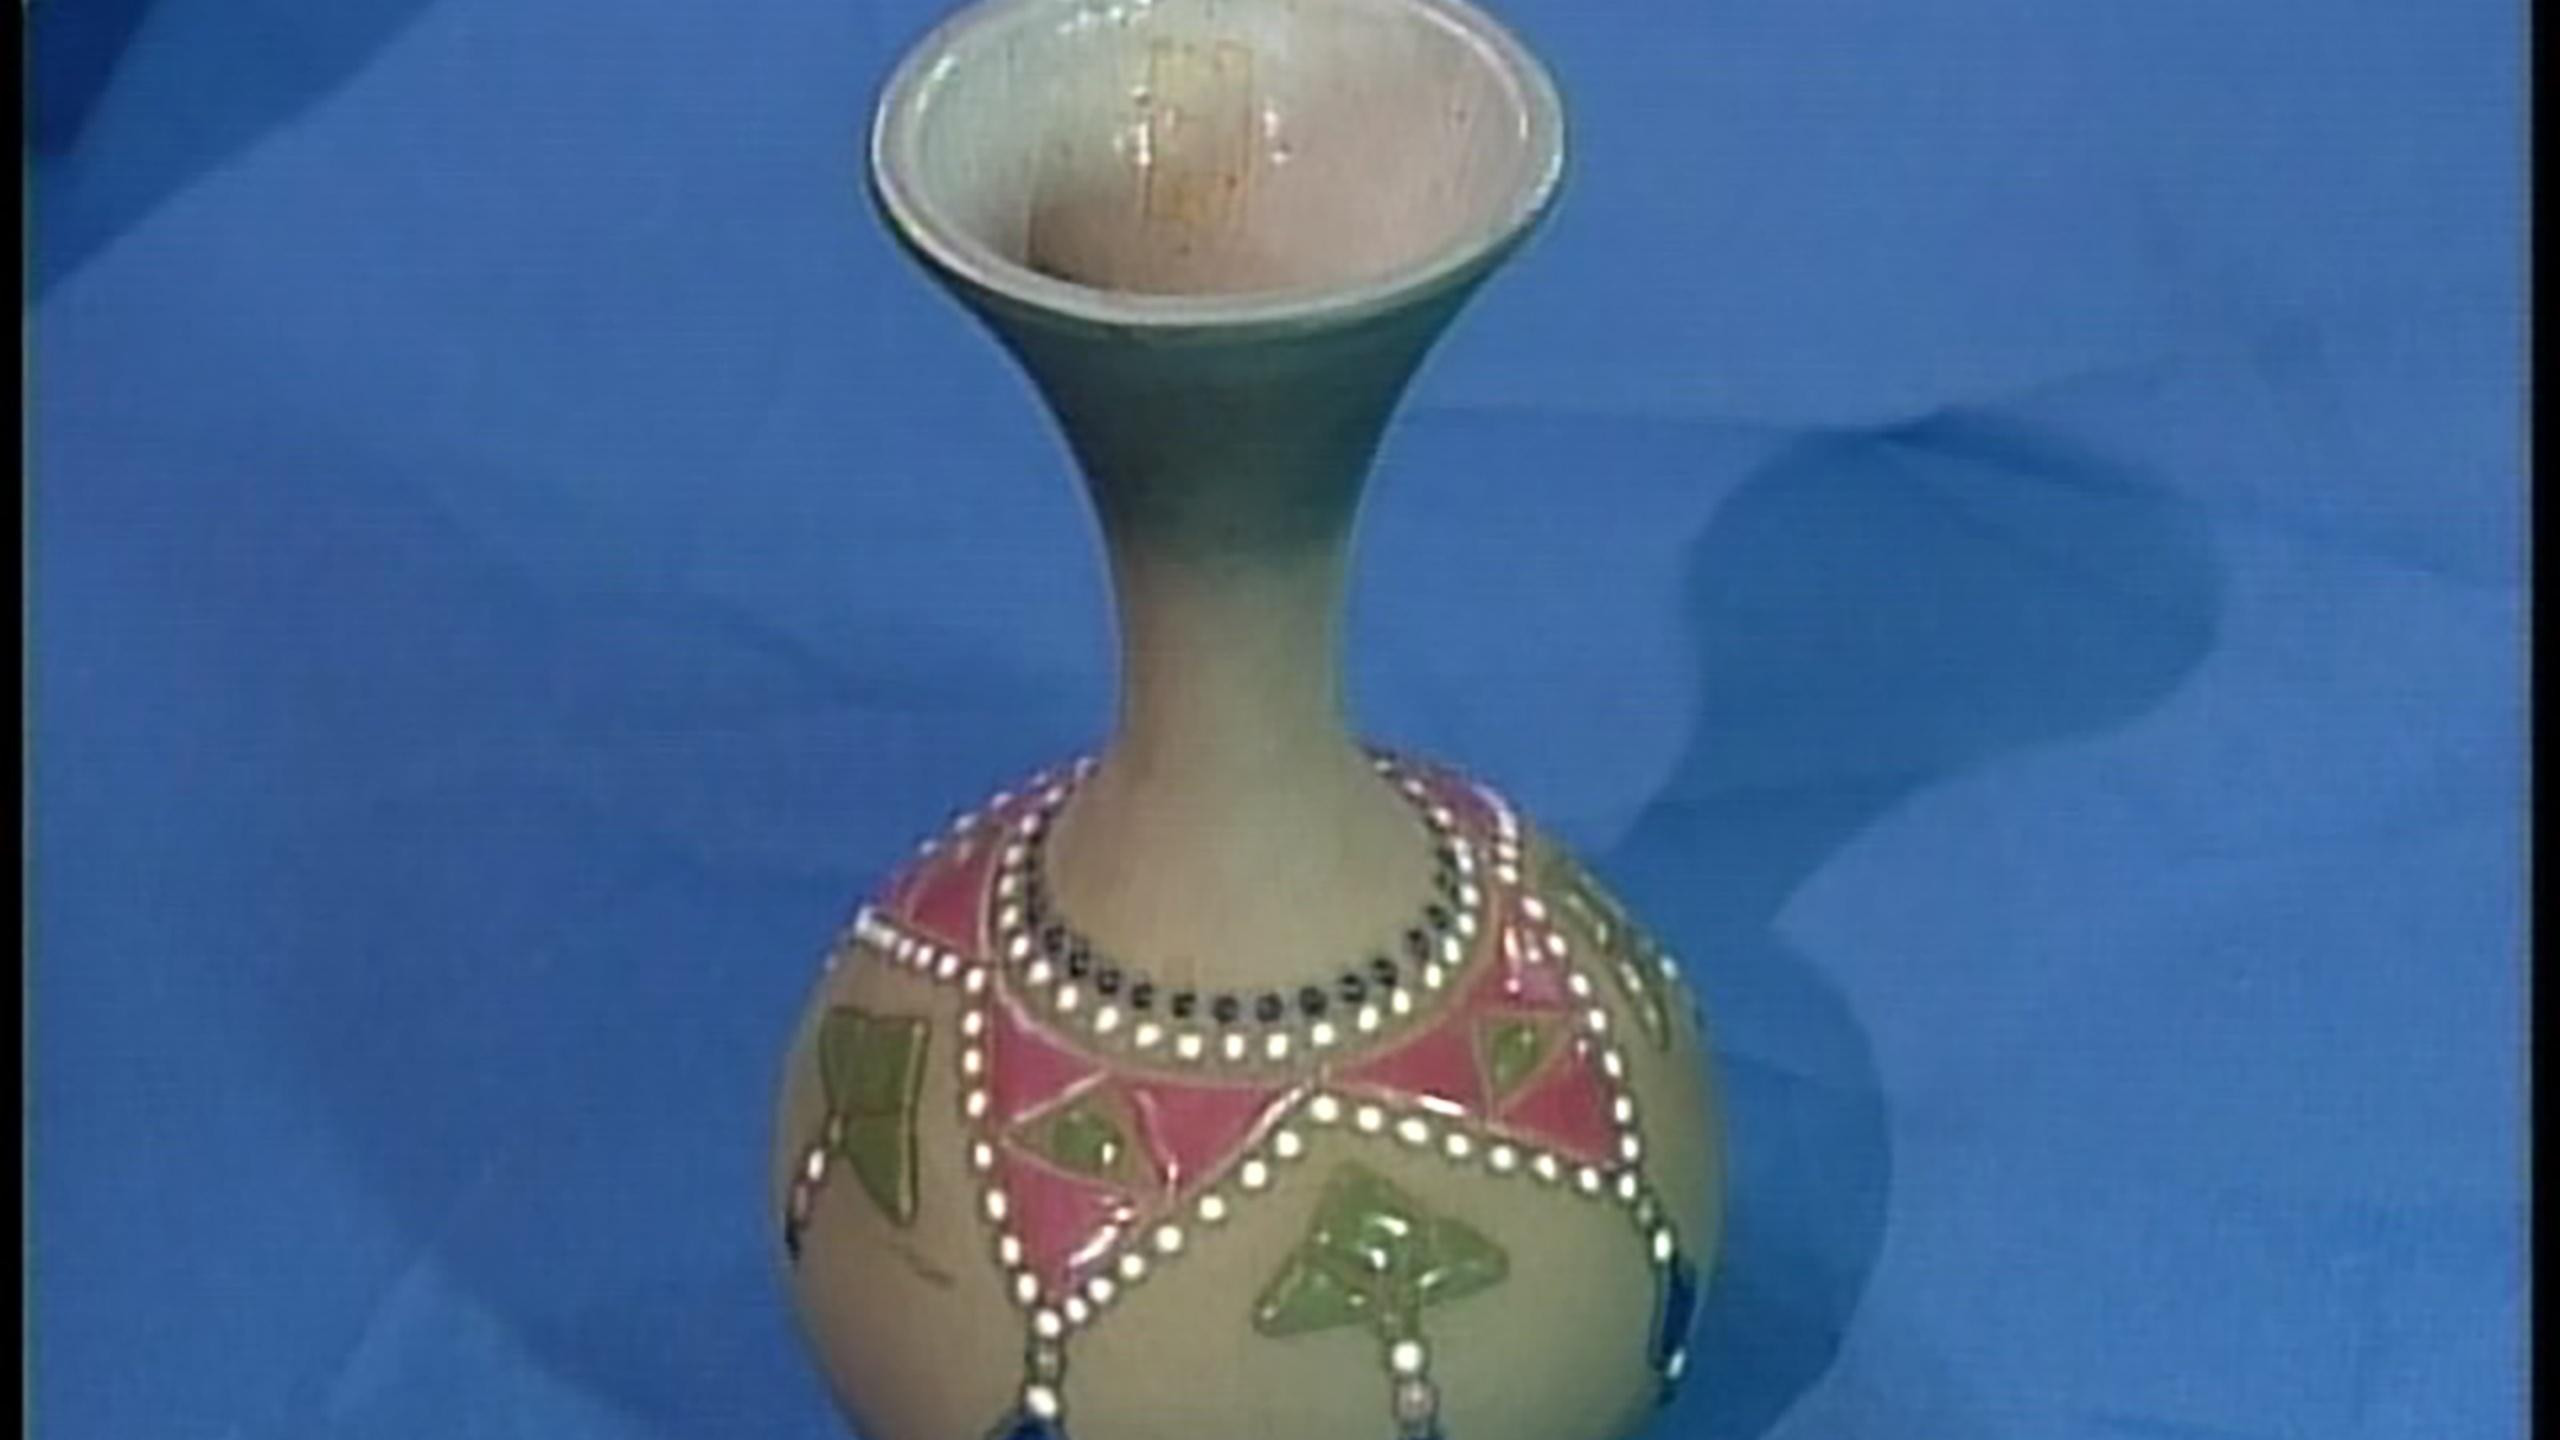 16 Perfect Antique Chinese Vases for Sale 2022 free download antique chinese vases for sale of antiques roadshow appraisal 18th century chinese tibetan bowl inside appraisal mccoy porcelain vase ca 1920